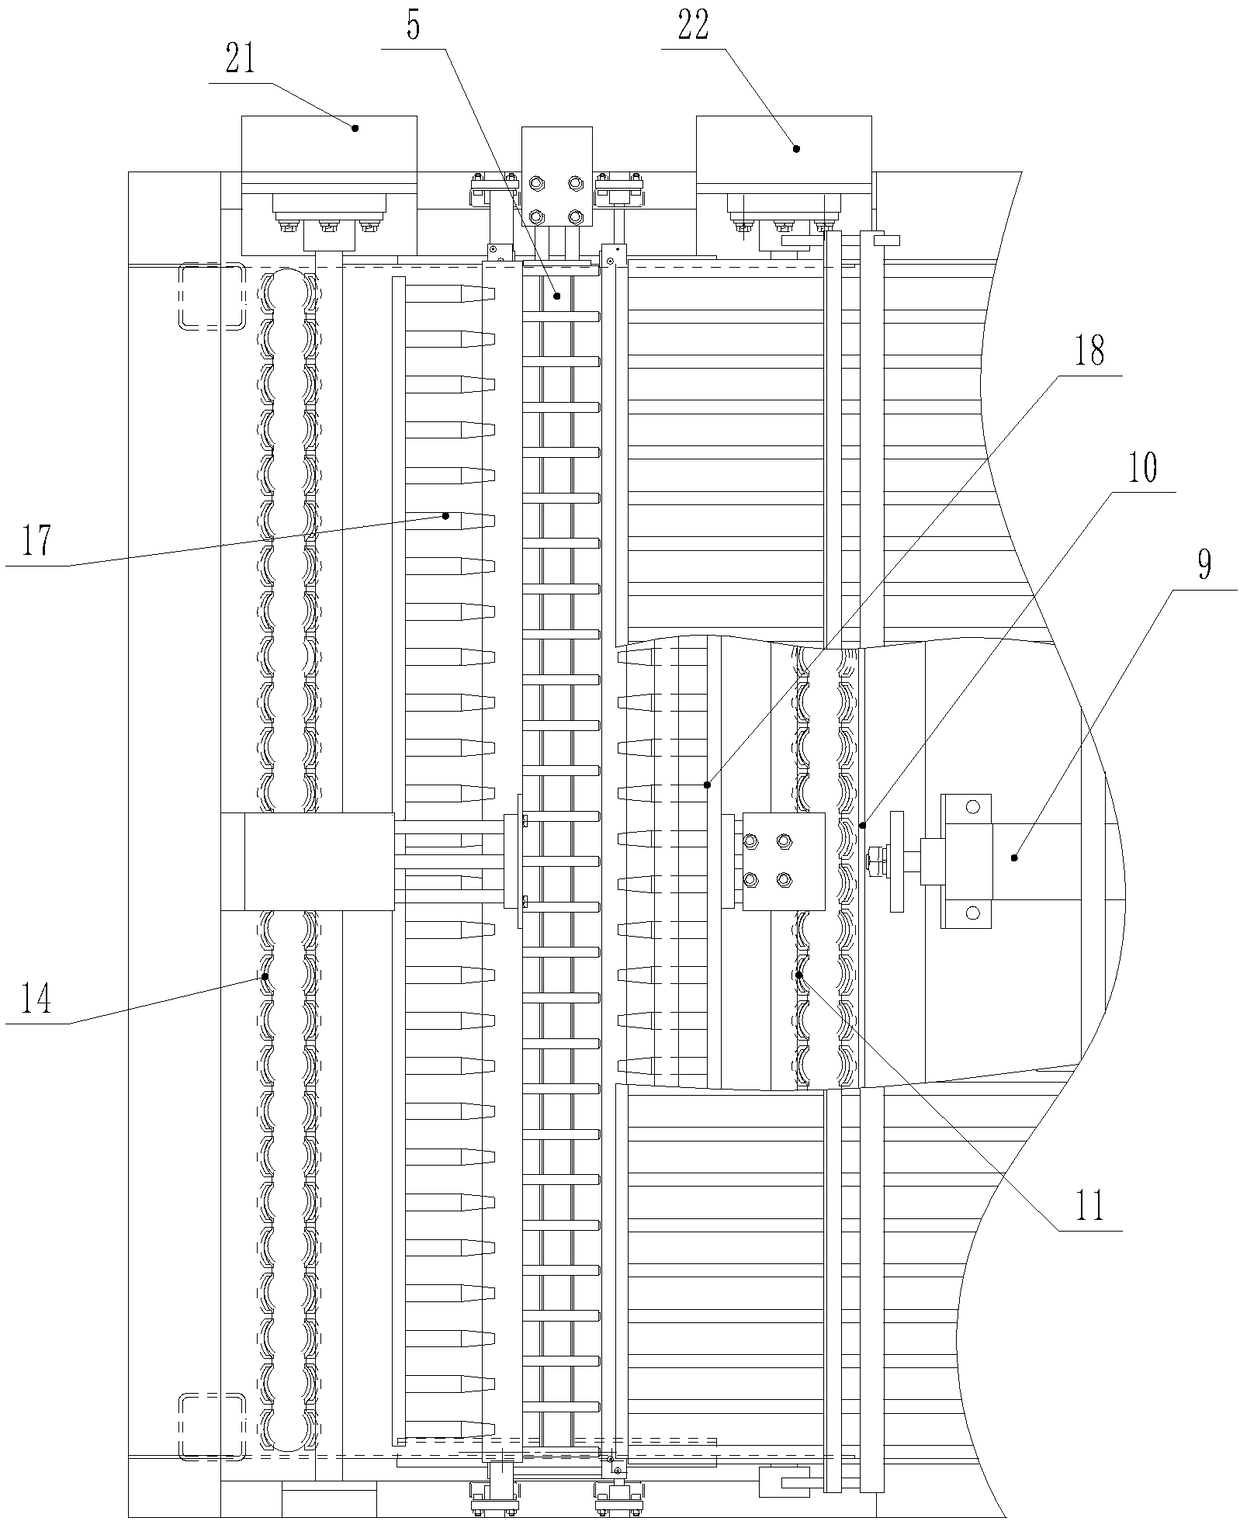 Bottle collecting and conveying device of penicillin bottle straightening machine